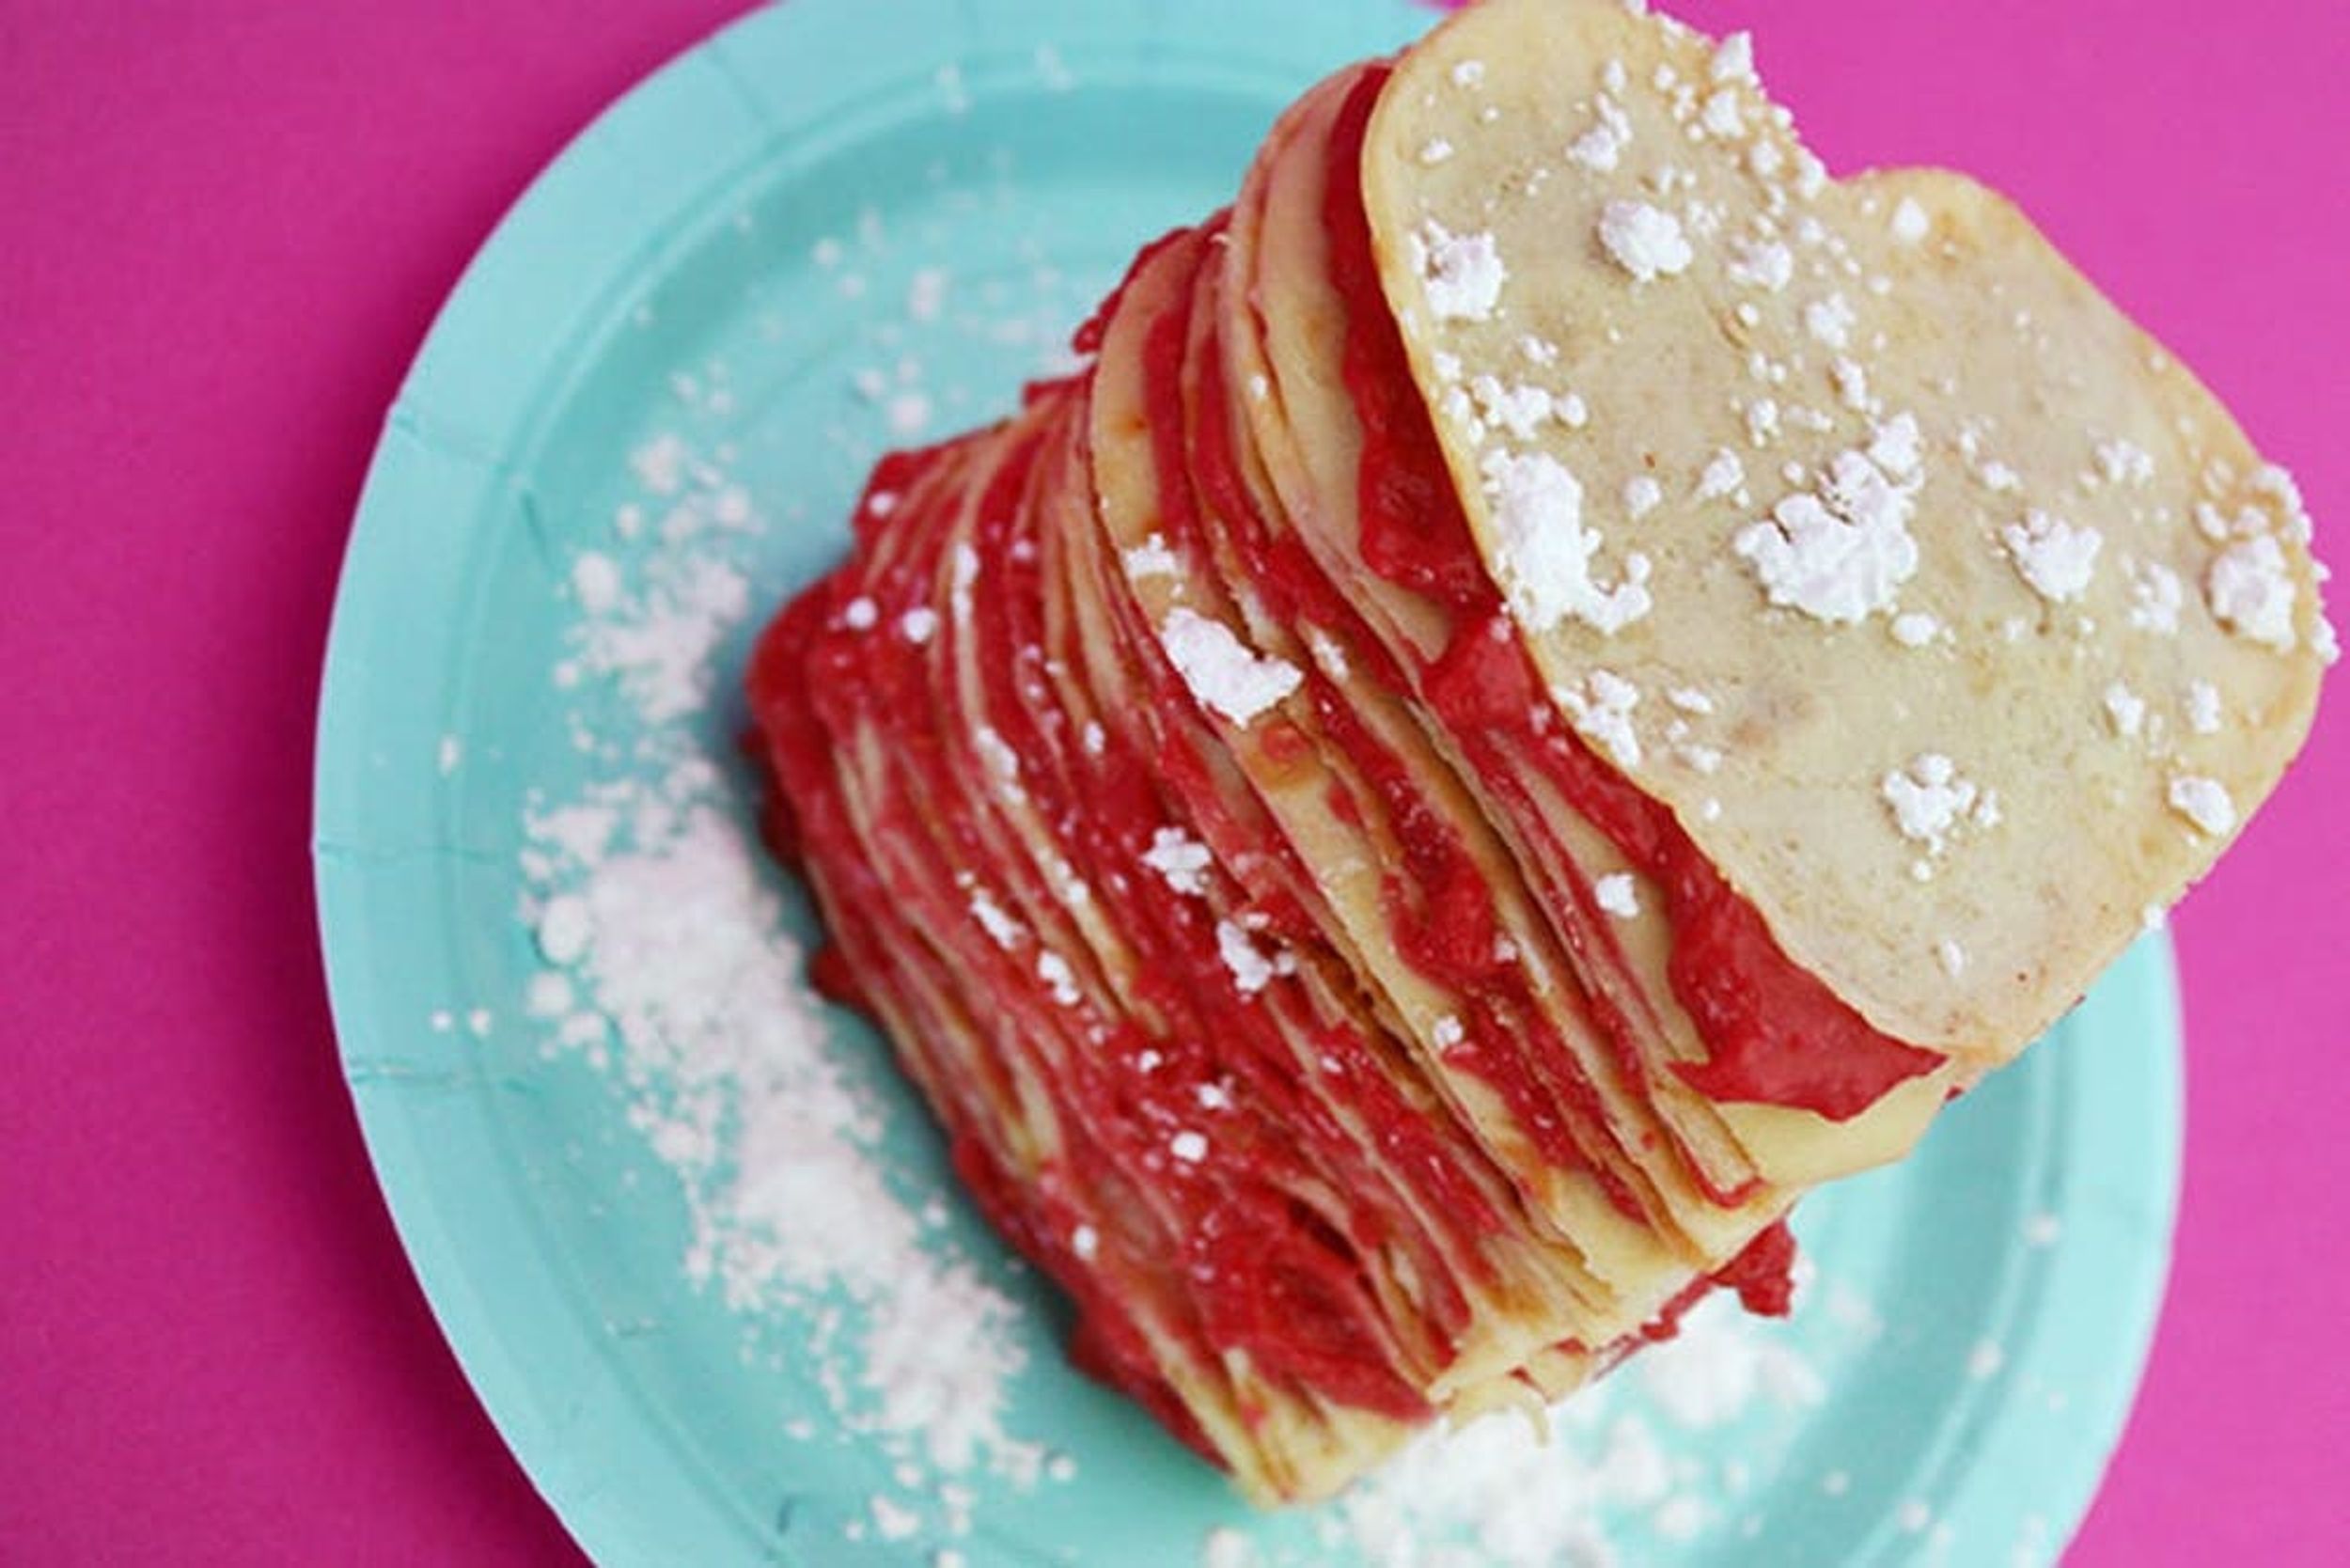 Let Them Eat Crepes: Introducing the Hundred Layer Crepe Cake